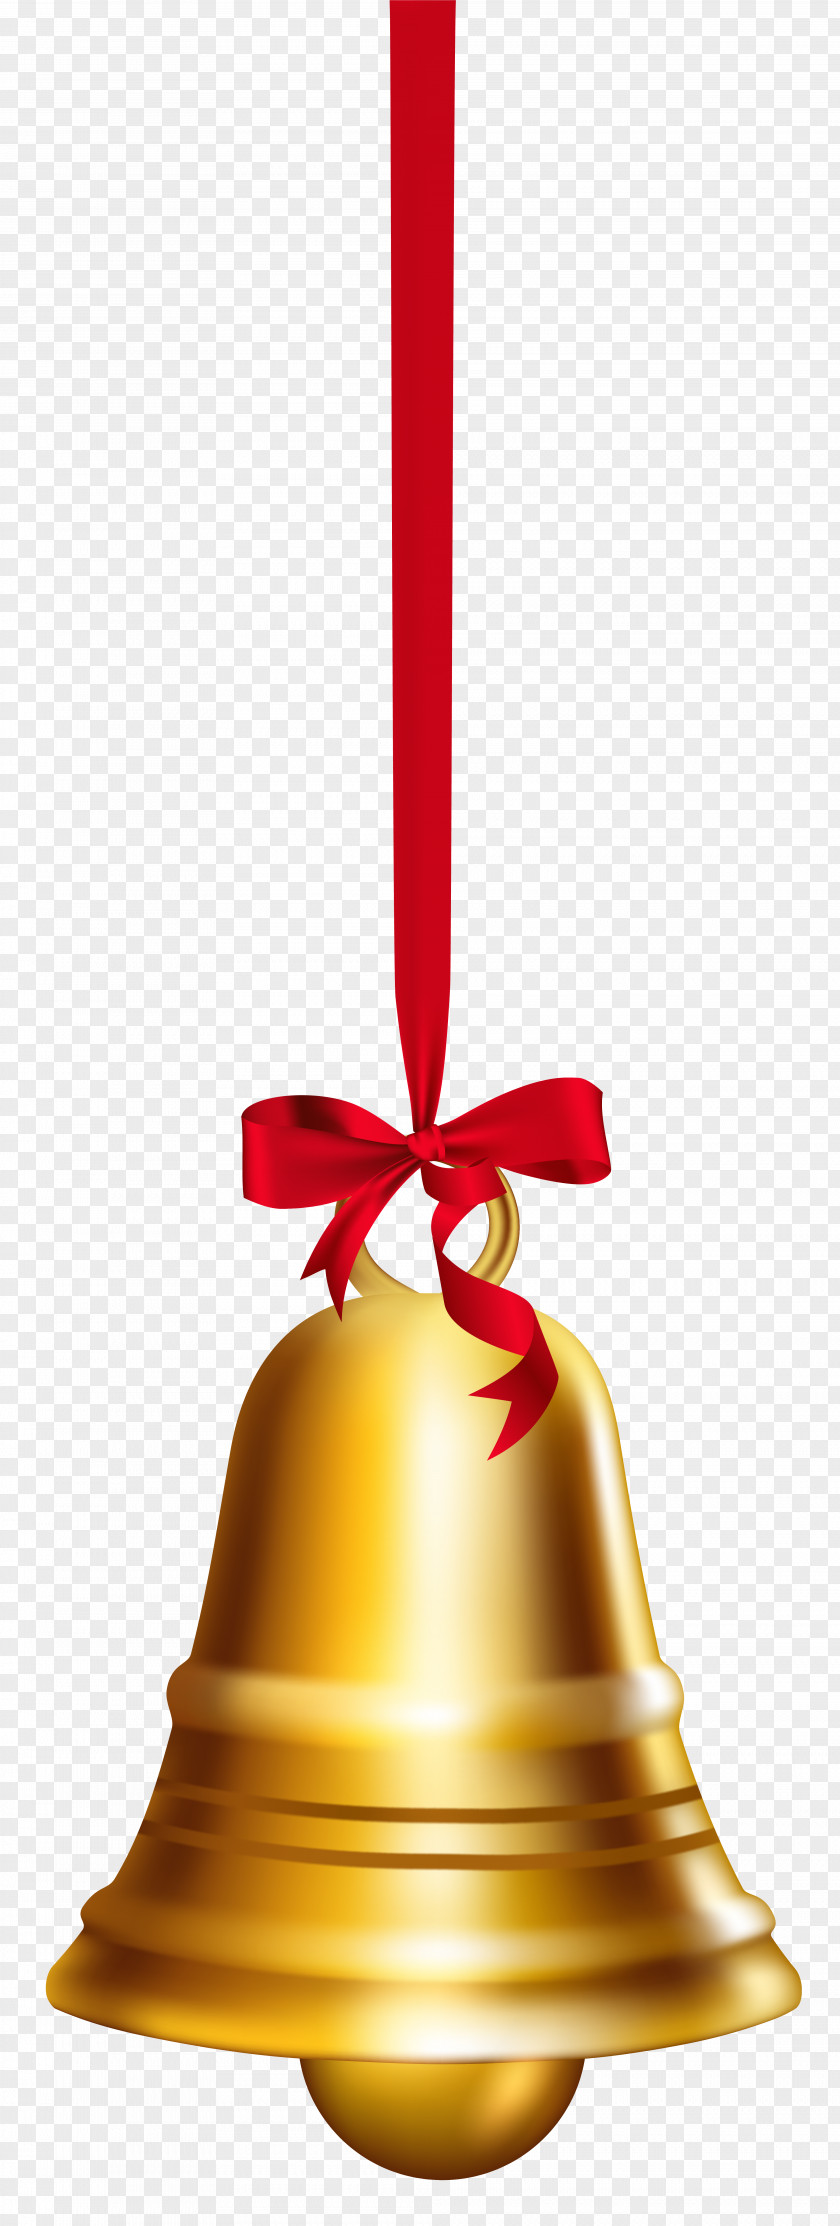 Gold Bell Clip Art Image Christmas PNG